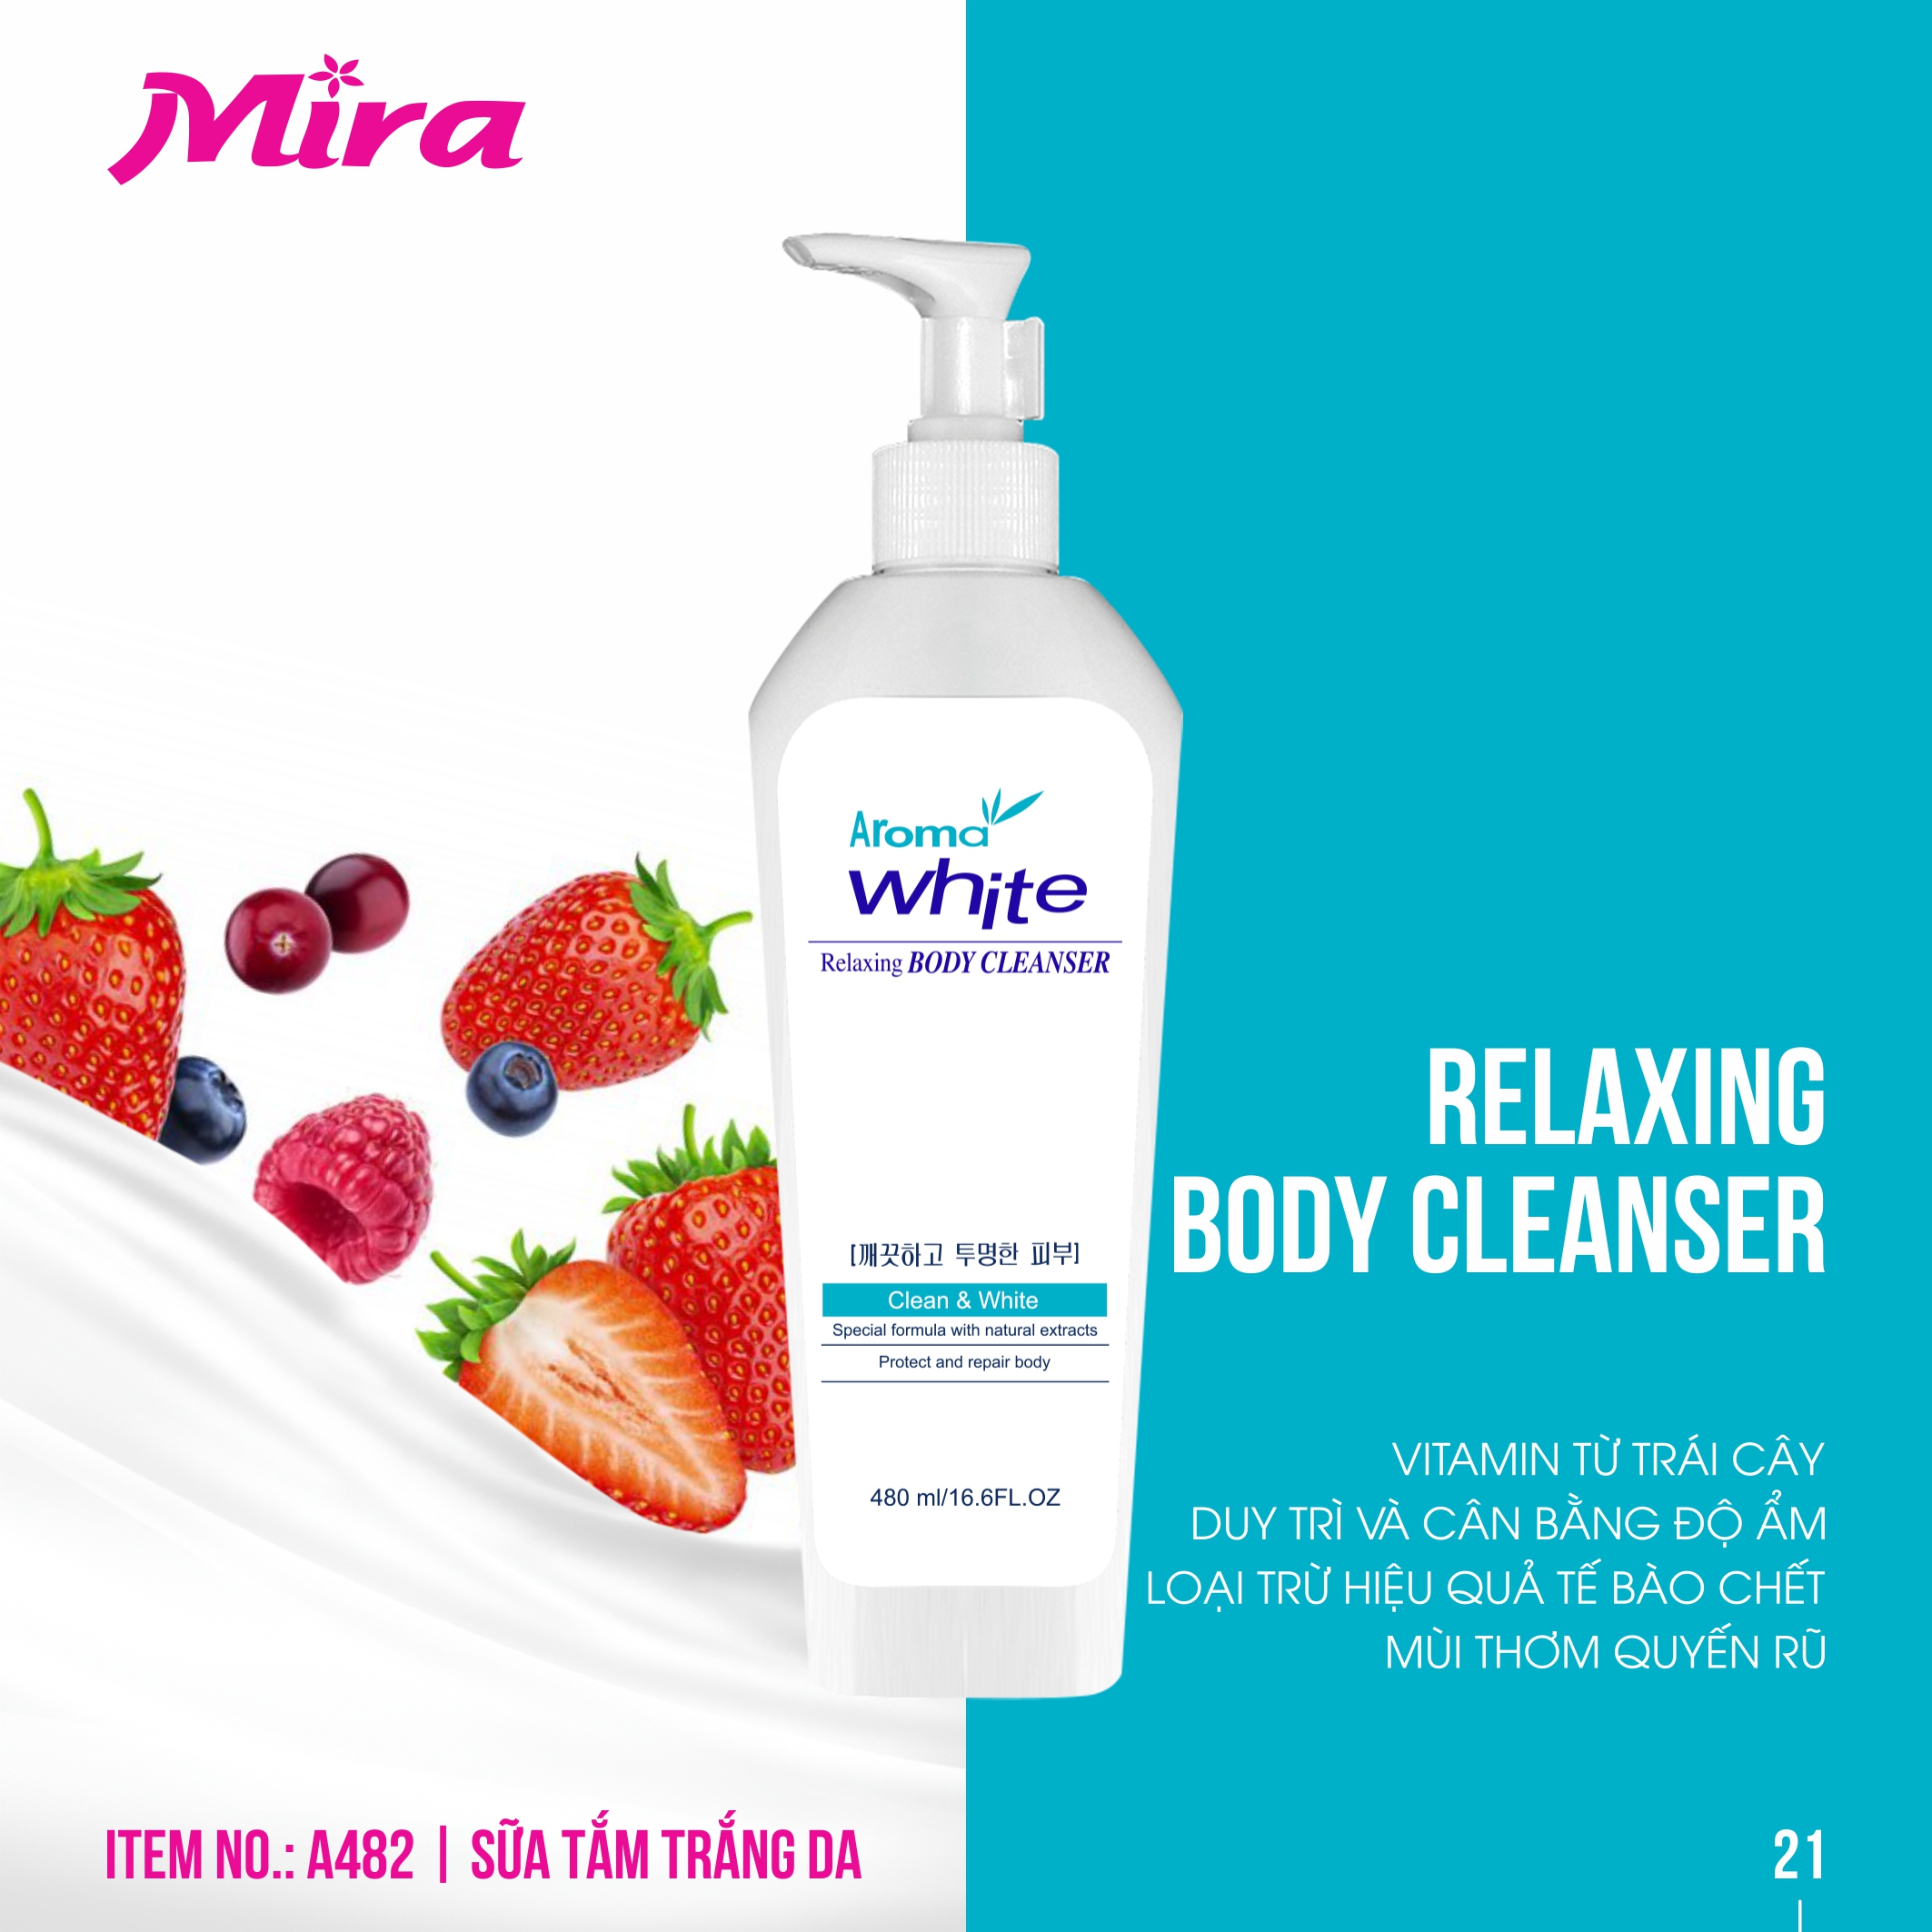 Sữa Tắm Trắng Aroma White Relaxing Body Cleanser (480ml)